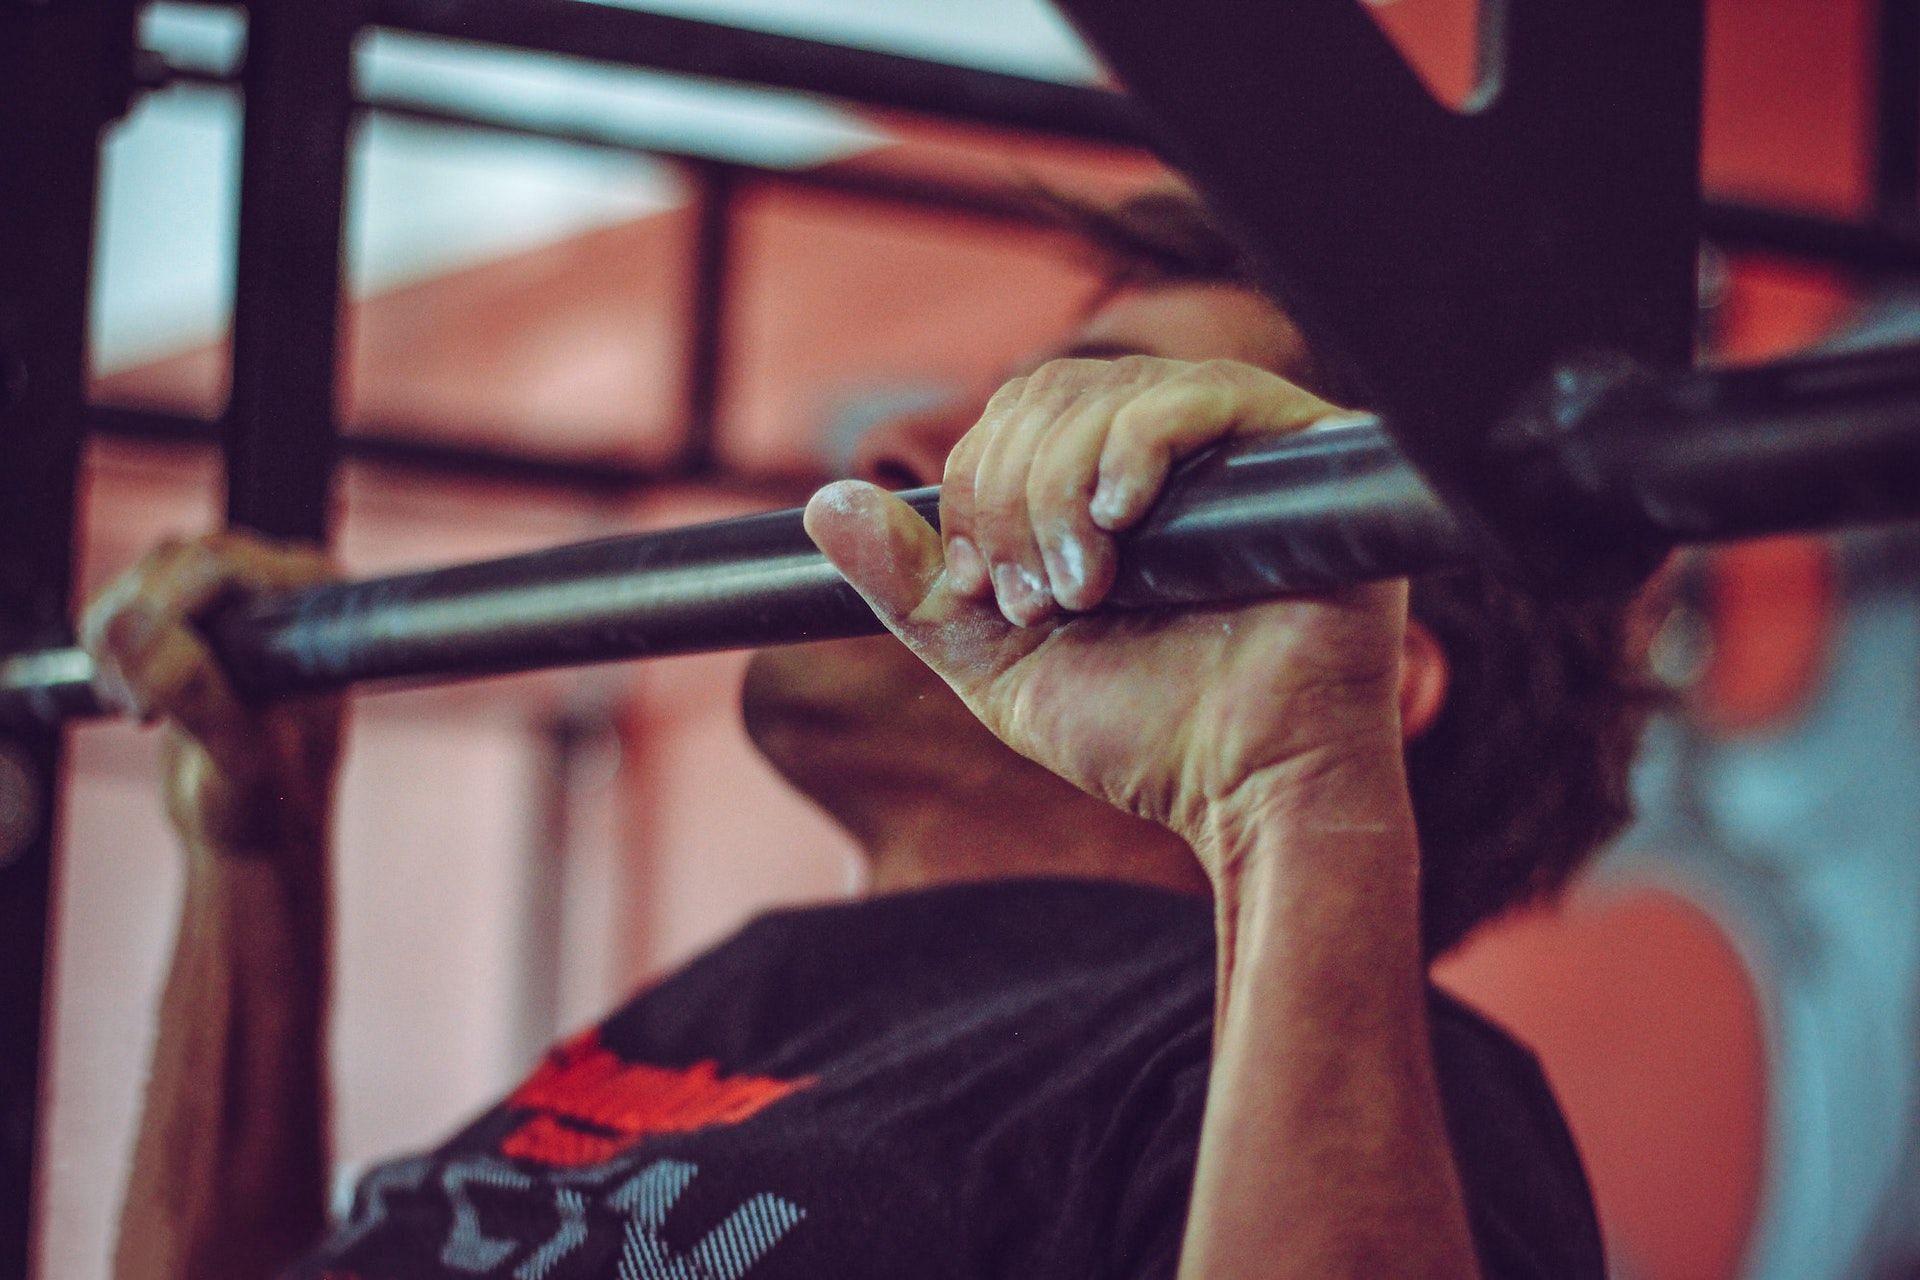 Hand exercise tool improves grip and strengthens the forearm. (Photo via Pexels/Victor Freitas)